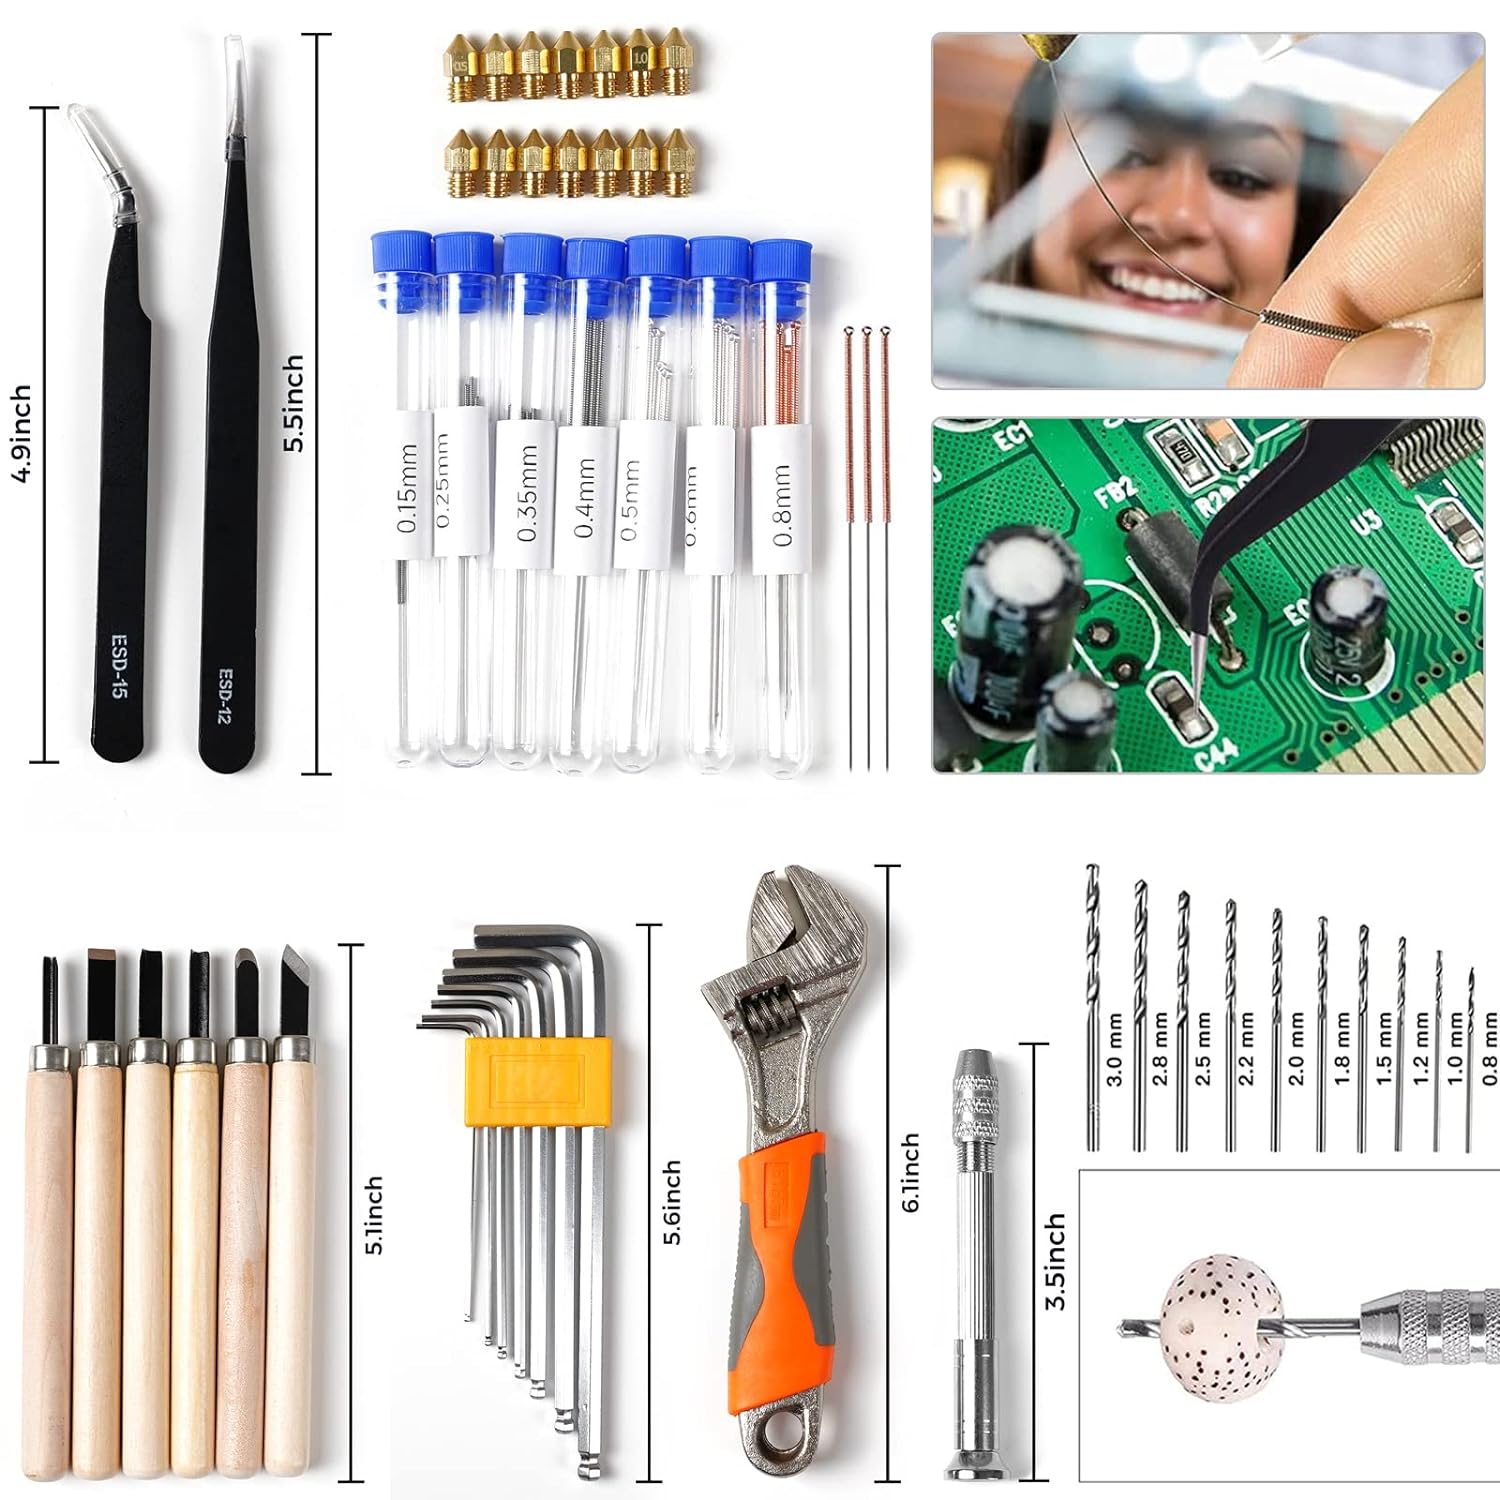 twotrees-244-piece-3d-printer-tool-kit-diverse-3d-printer-nozzle-cleaning-kit-and-repair-tool-set-including-tool-box-for-1 Twotrees 244 Piece 3D Printer Tool Kit Review